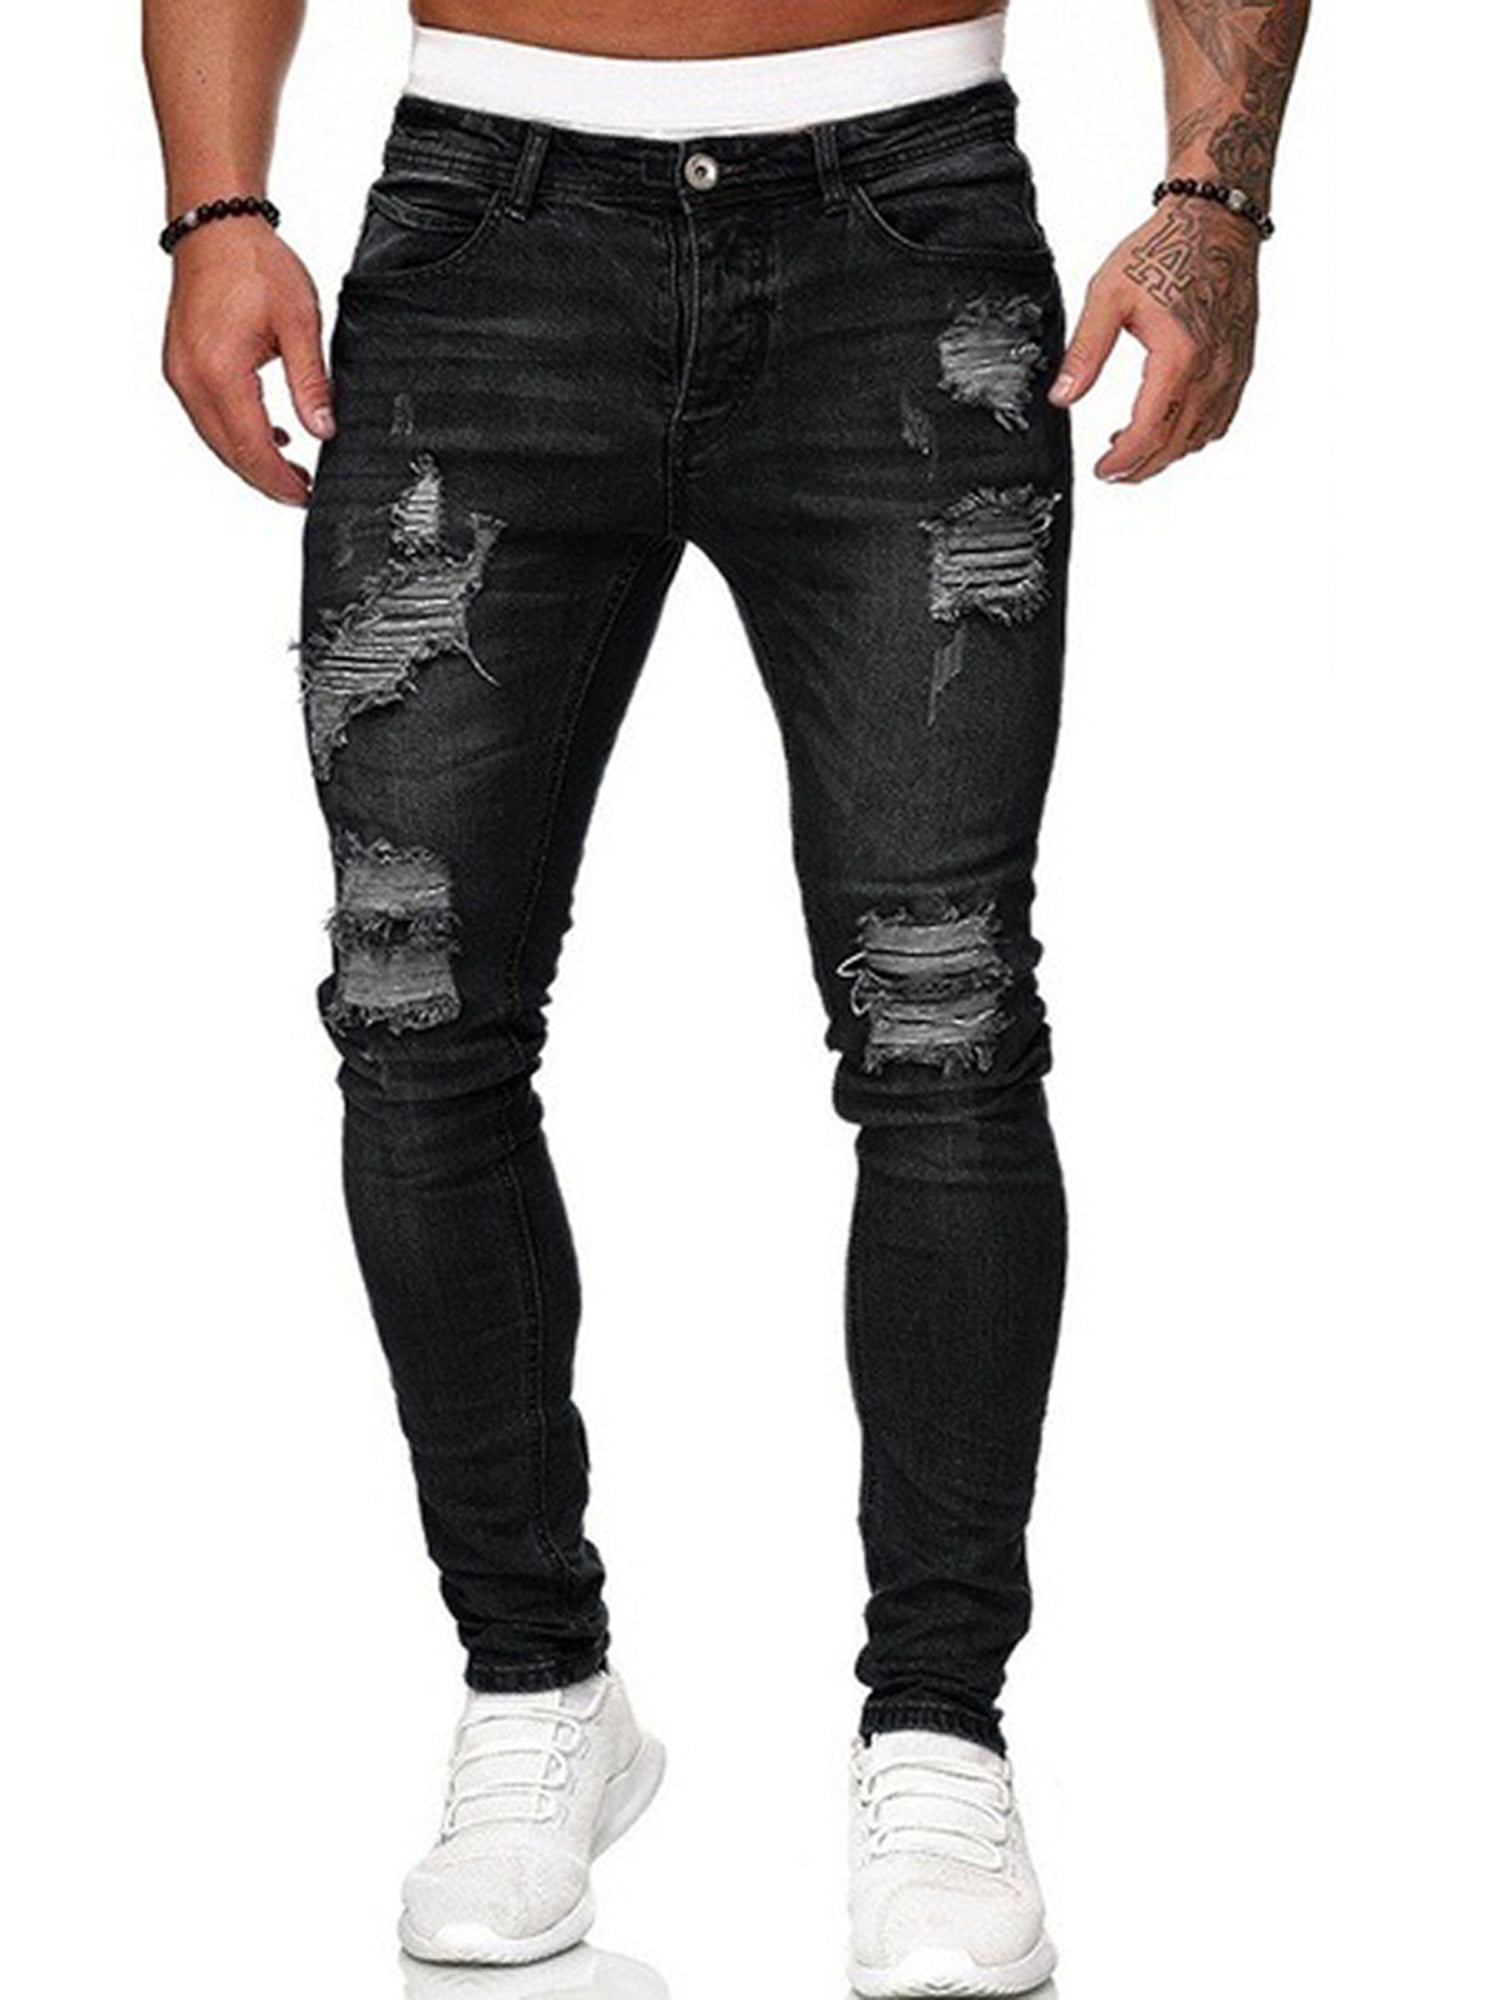 Diconna Men's Stretch Skinny Ripped Jeans Super Comfy Distressed Denim  Pants With Destroyed Holes Black XL